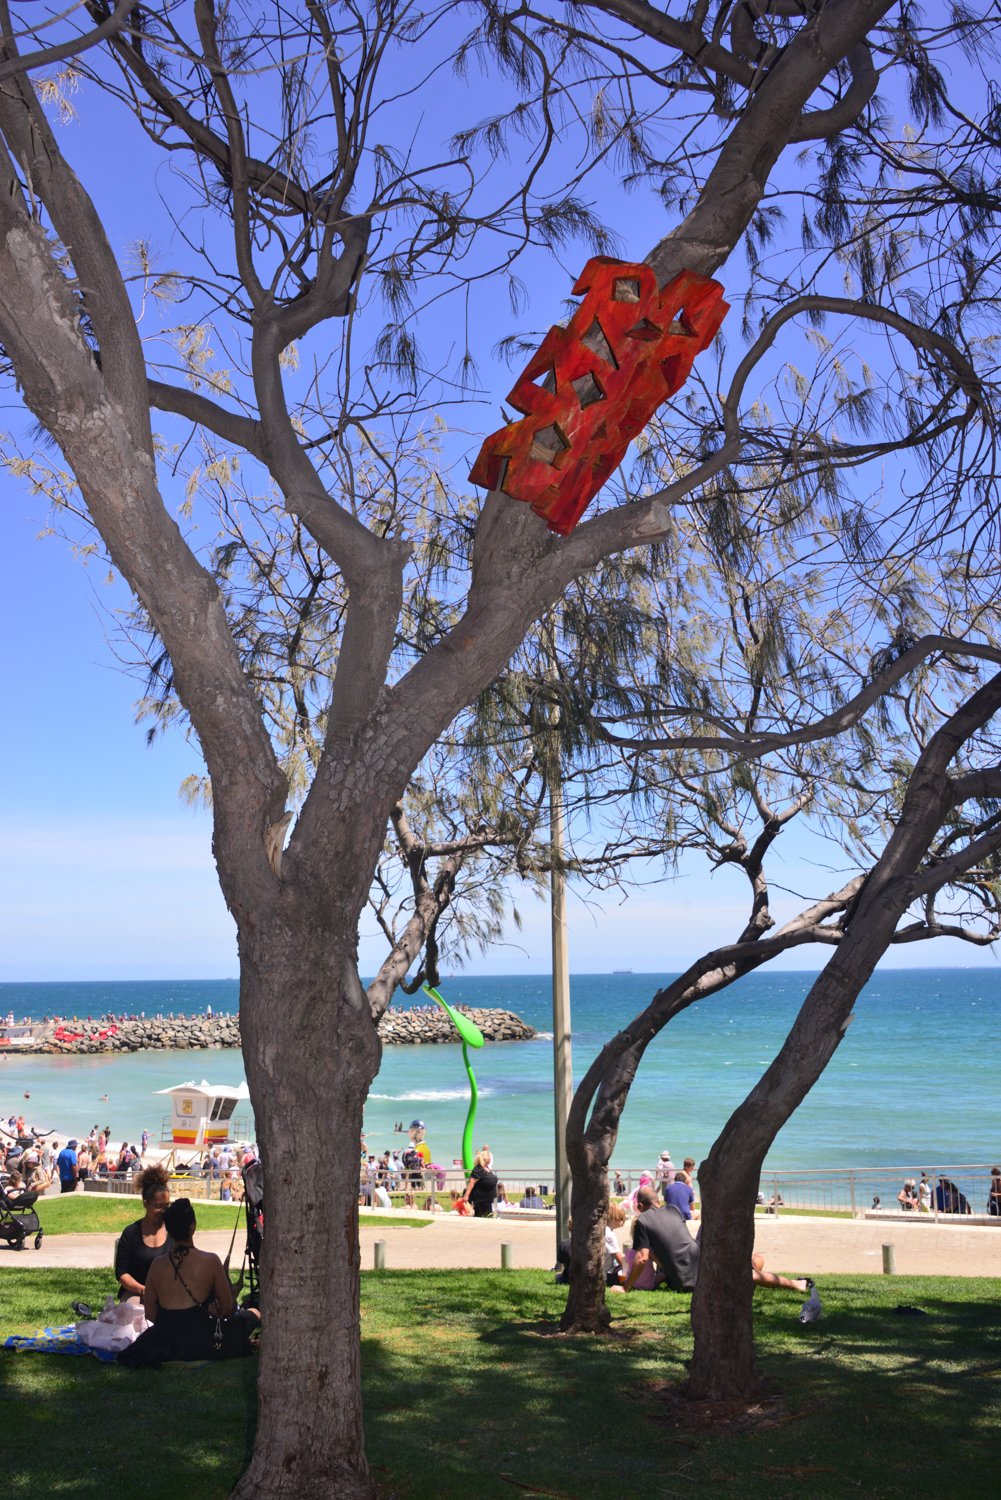 Heike Endemann, Crawing Cottesloe, wood, painted, ca. 98 x 52 x 34 cm, Sculpture by the Sea, Cottesloe 2019 Â©Clyde Yee